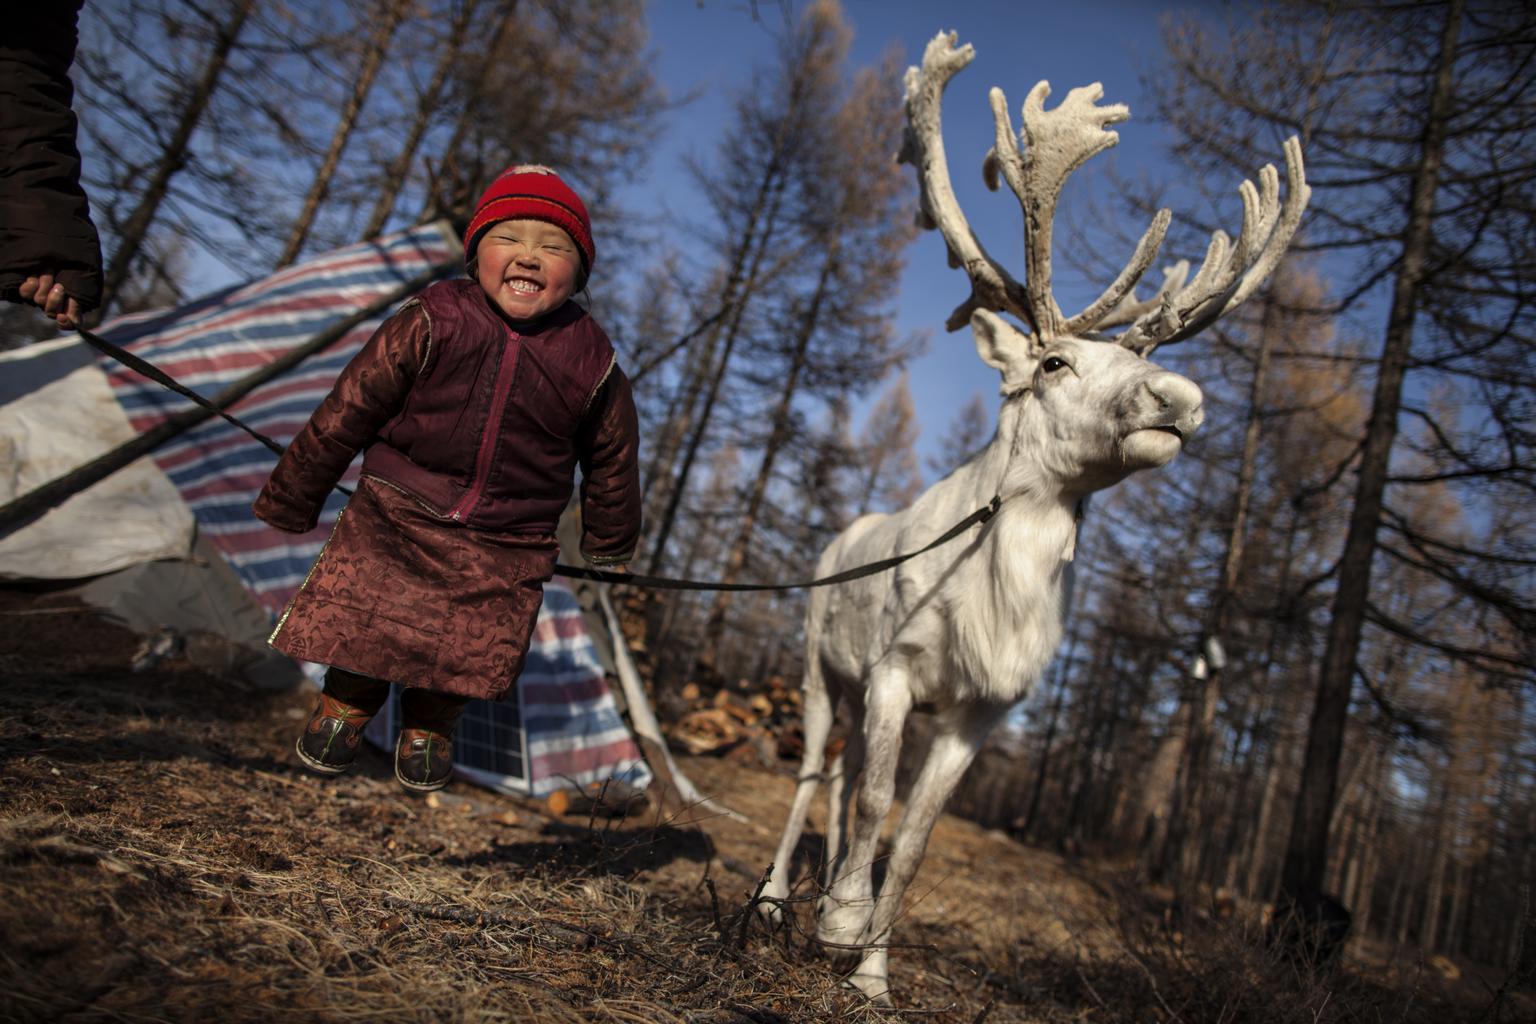 P. Otgonjargal, 4, smiles while jumping excitedly next to one of her family’s reindeer in a remote area of the ‘soum’ (district) of Tsagaannur